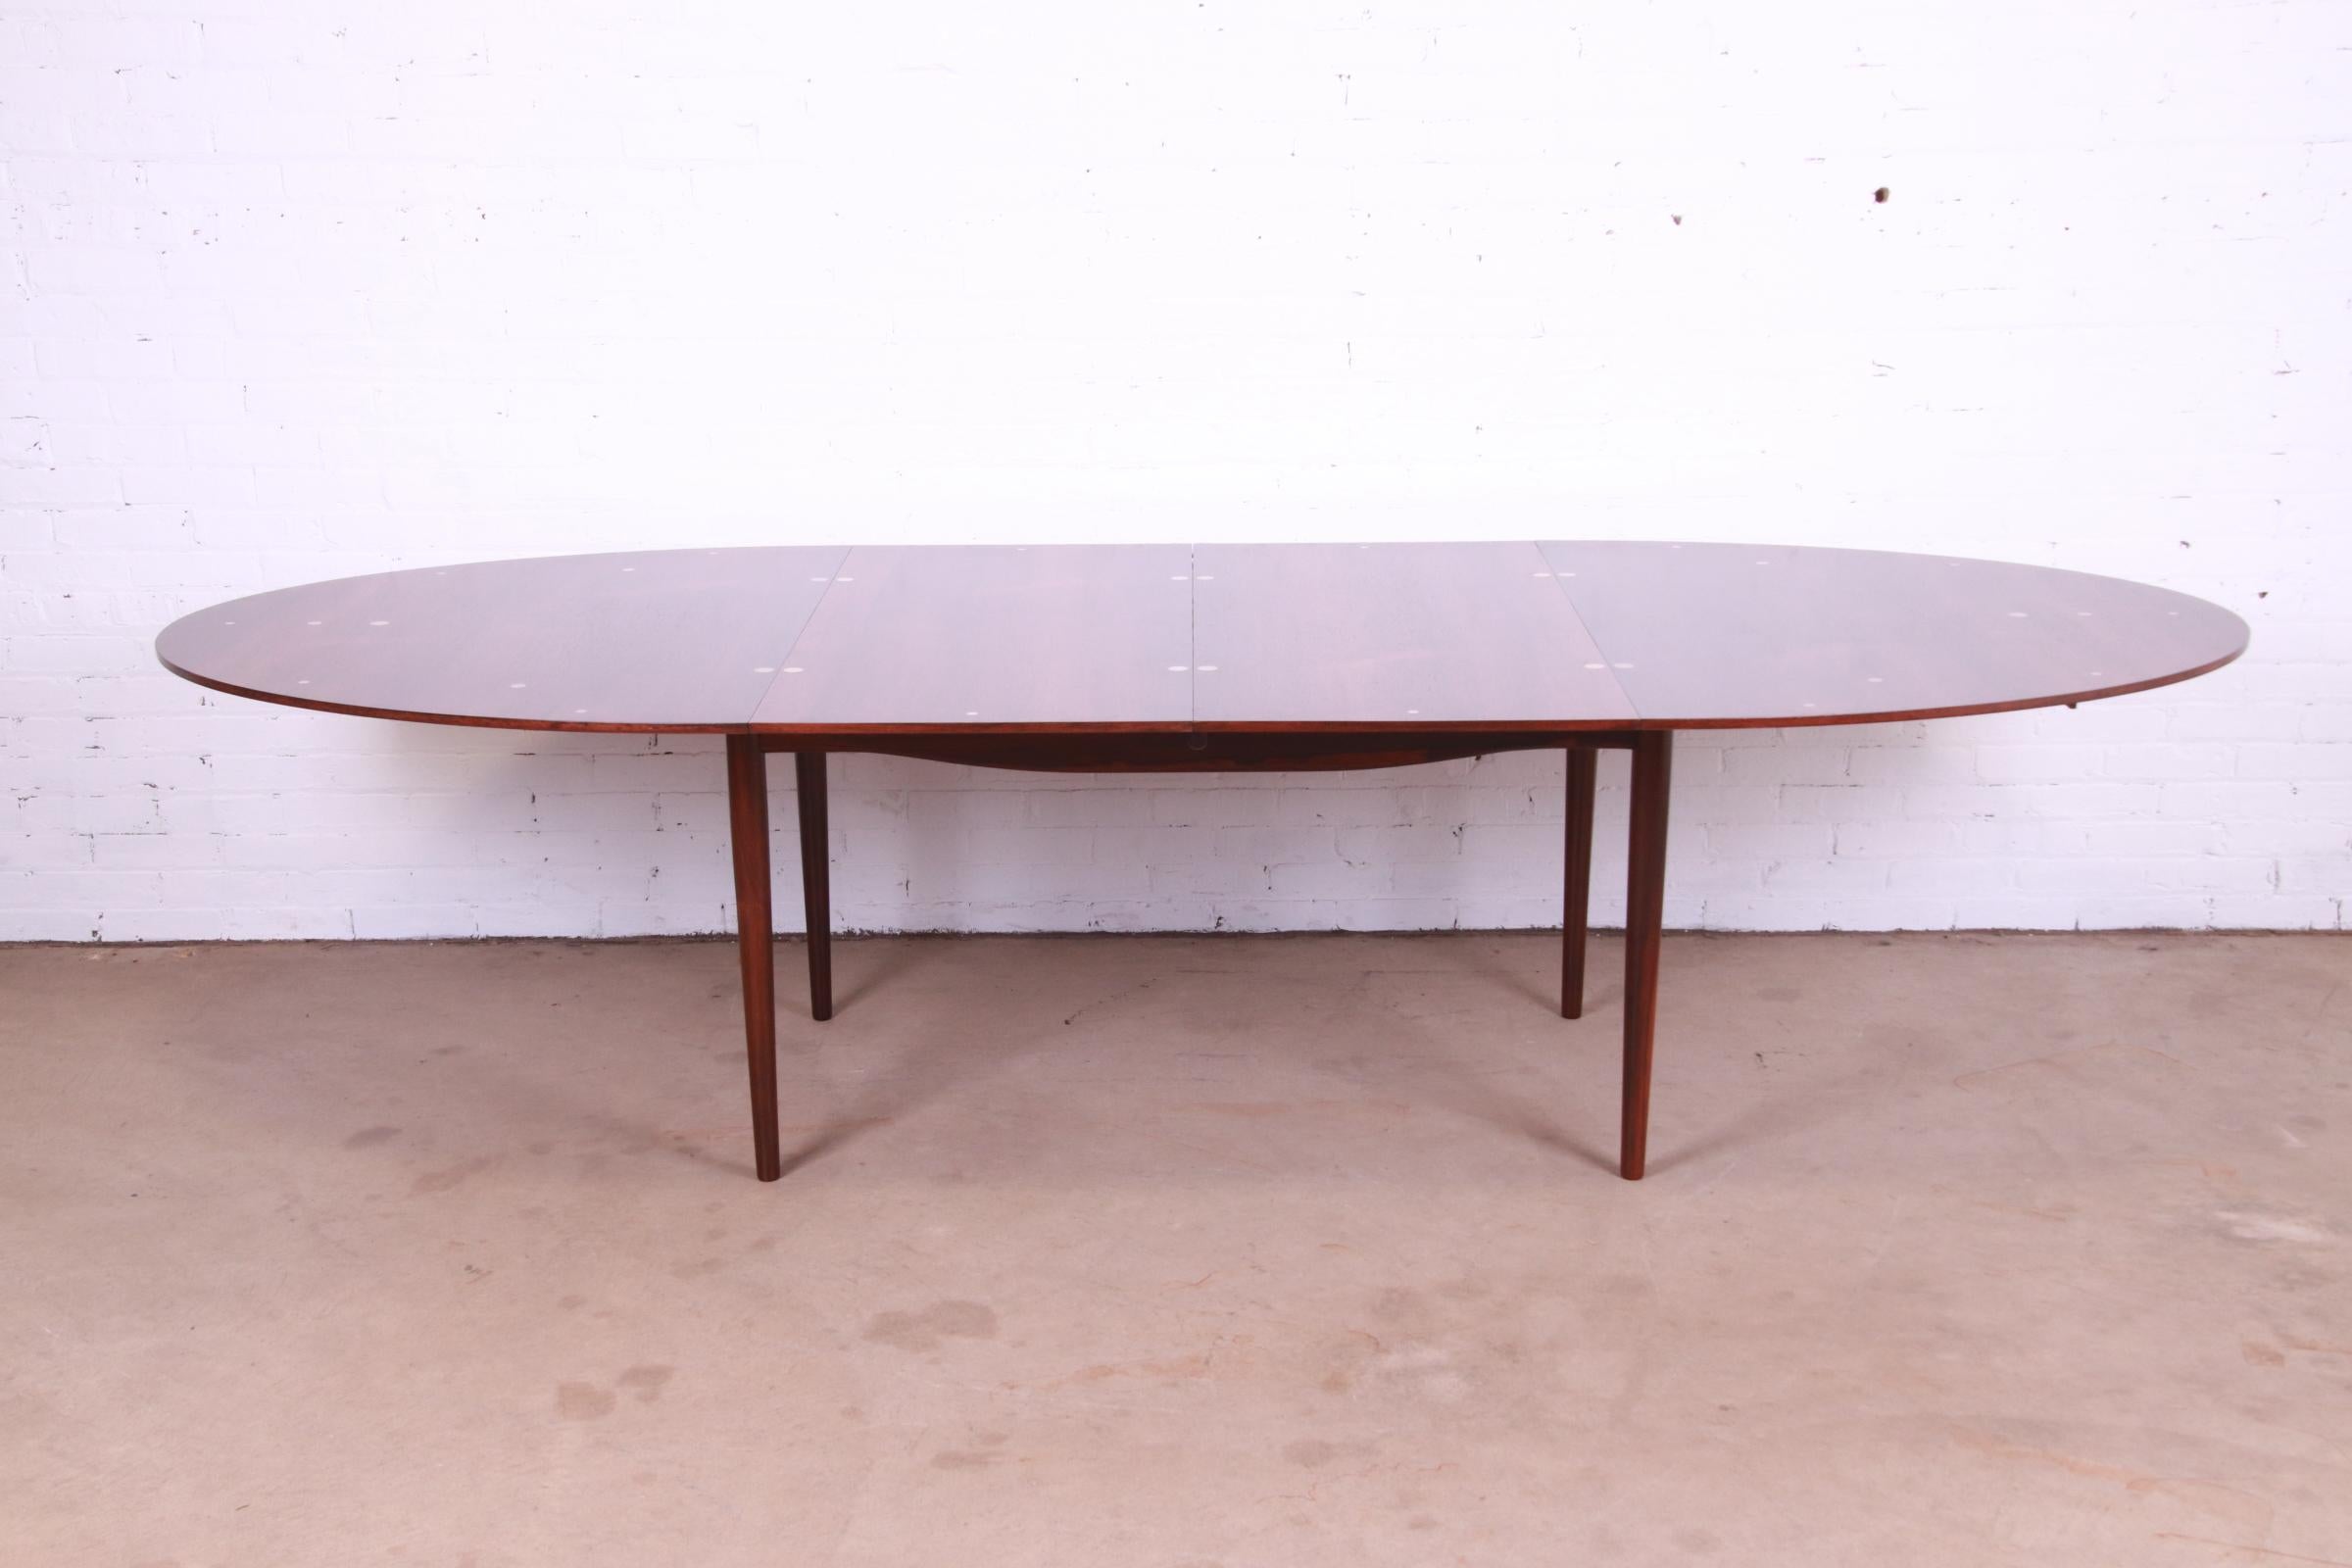 An extremely rare and exceptional mid-century Danish Modern 